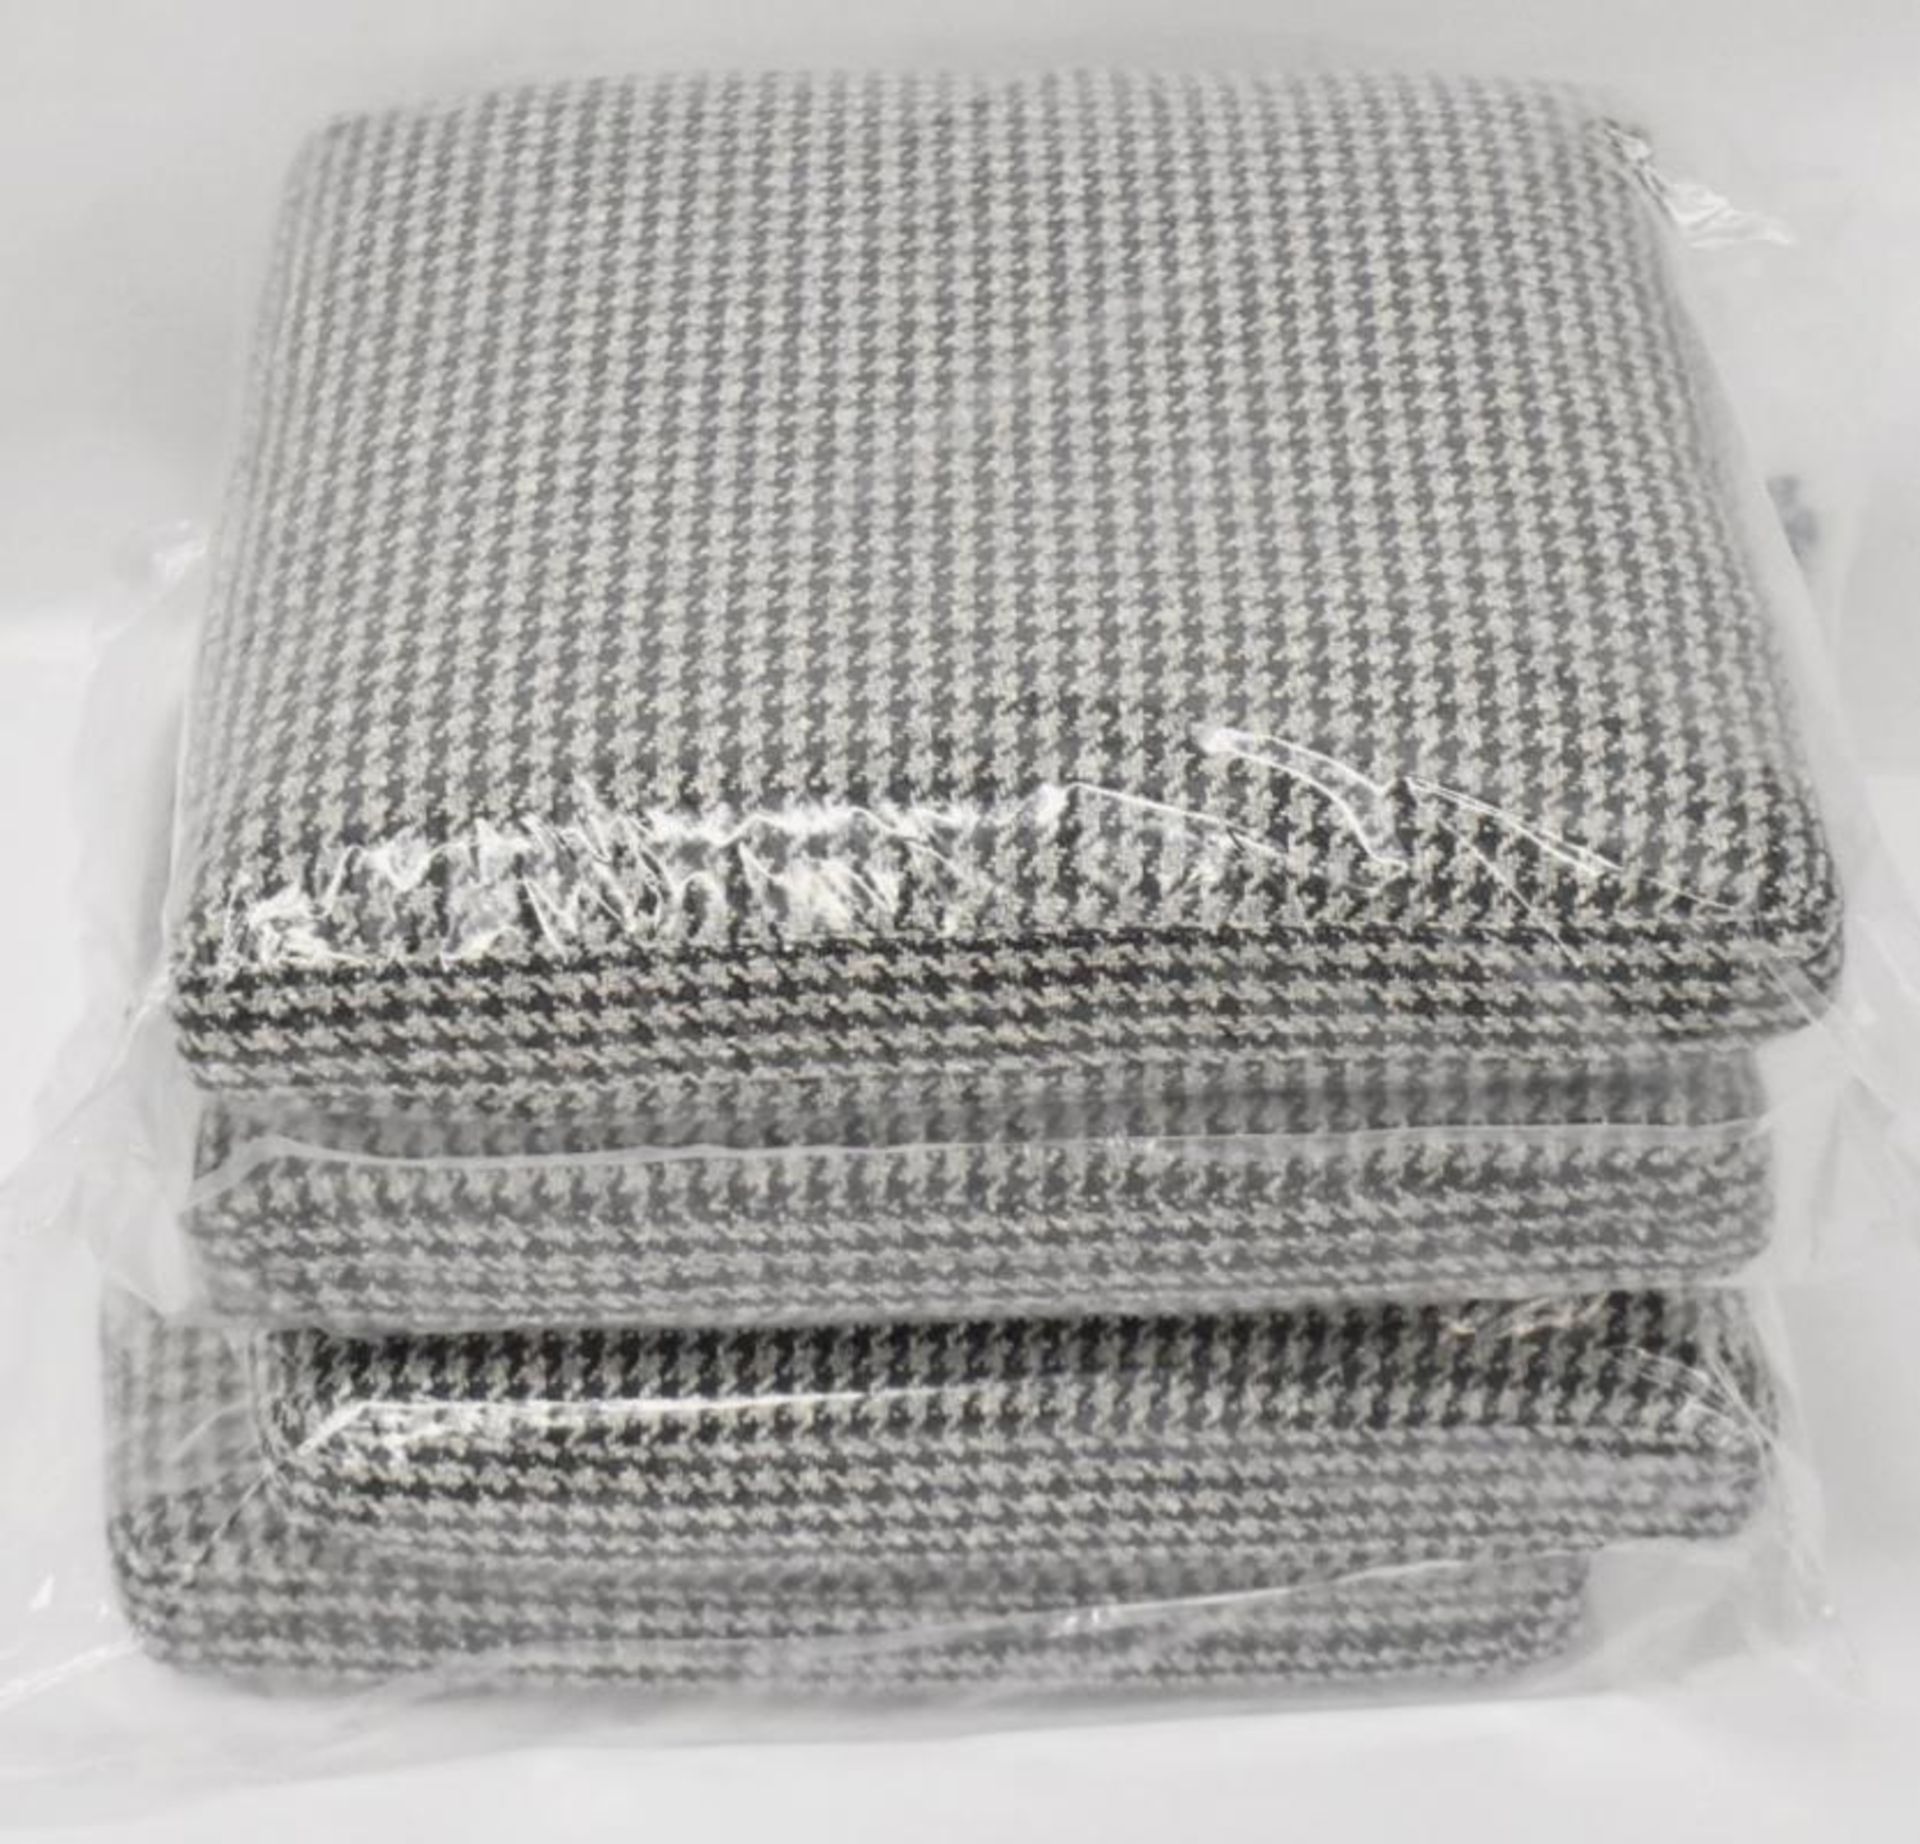 4 x B&B ITALIA 'Andy 13' Sofa Back Cushions In A Premium Woven Houndstooth Fabric - Ref: 5089331/A/P - Image 2 of 4